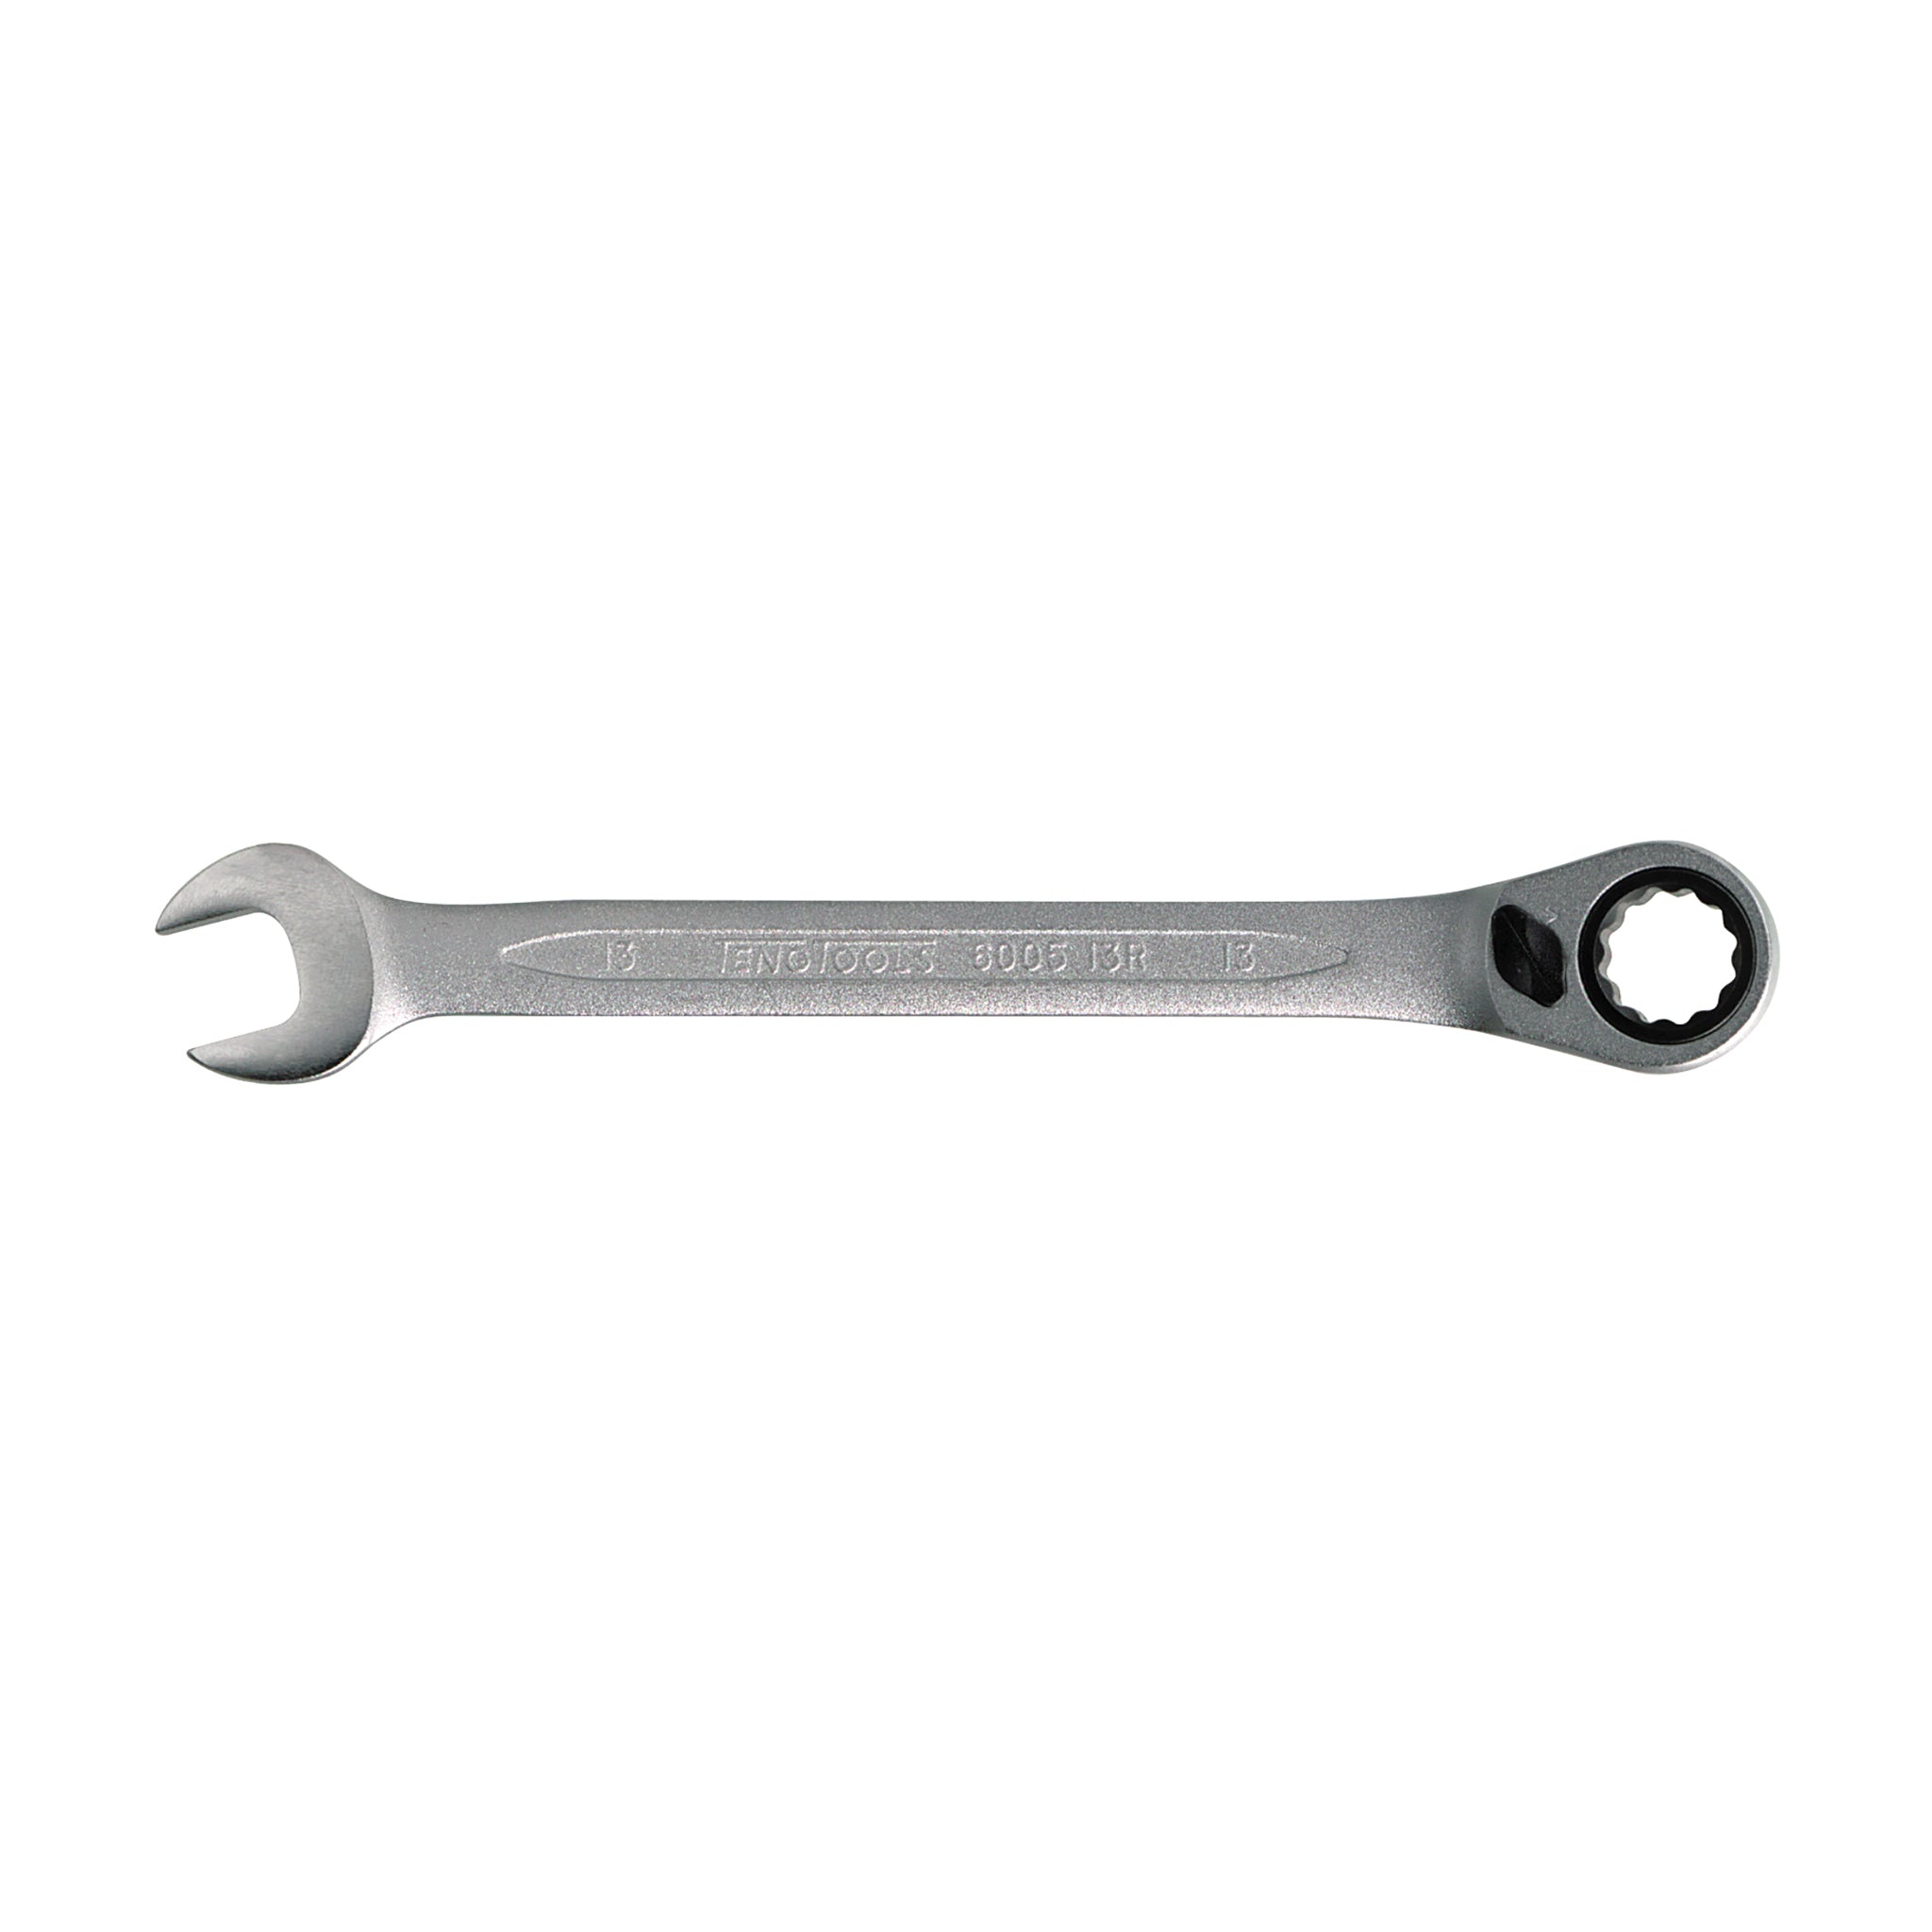 72 Teeth Ratchet Combination Metric Wrenches With Flip Reverse Lever - 13mm